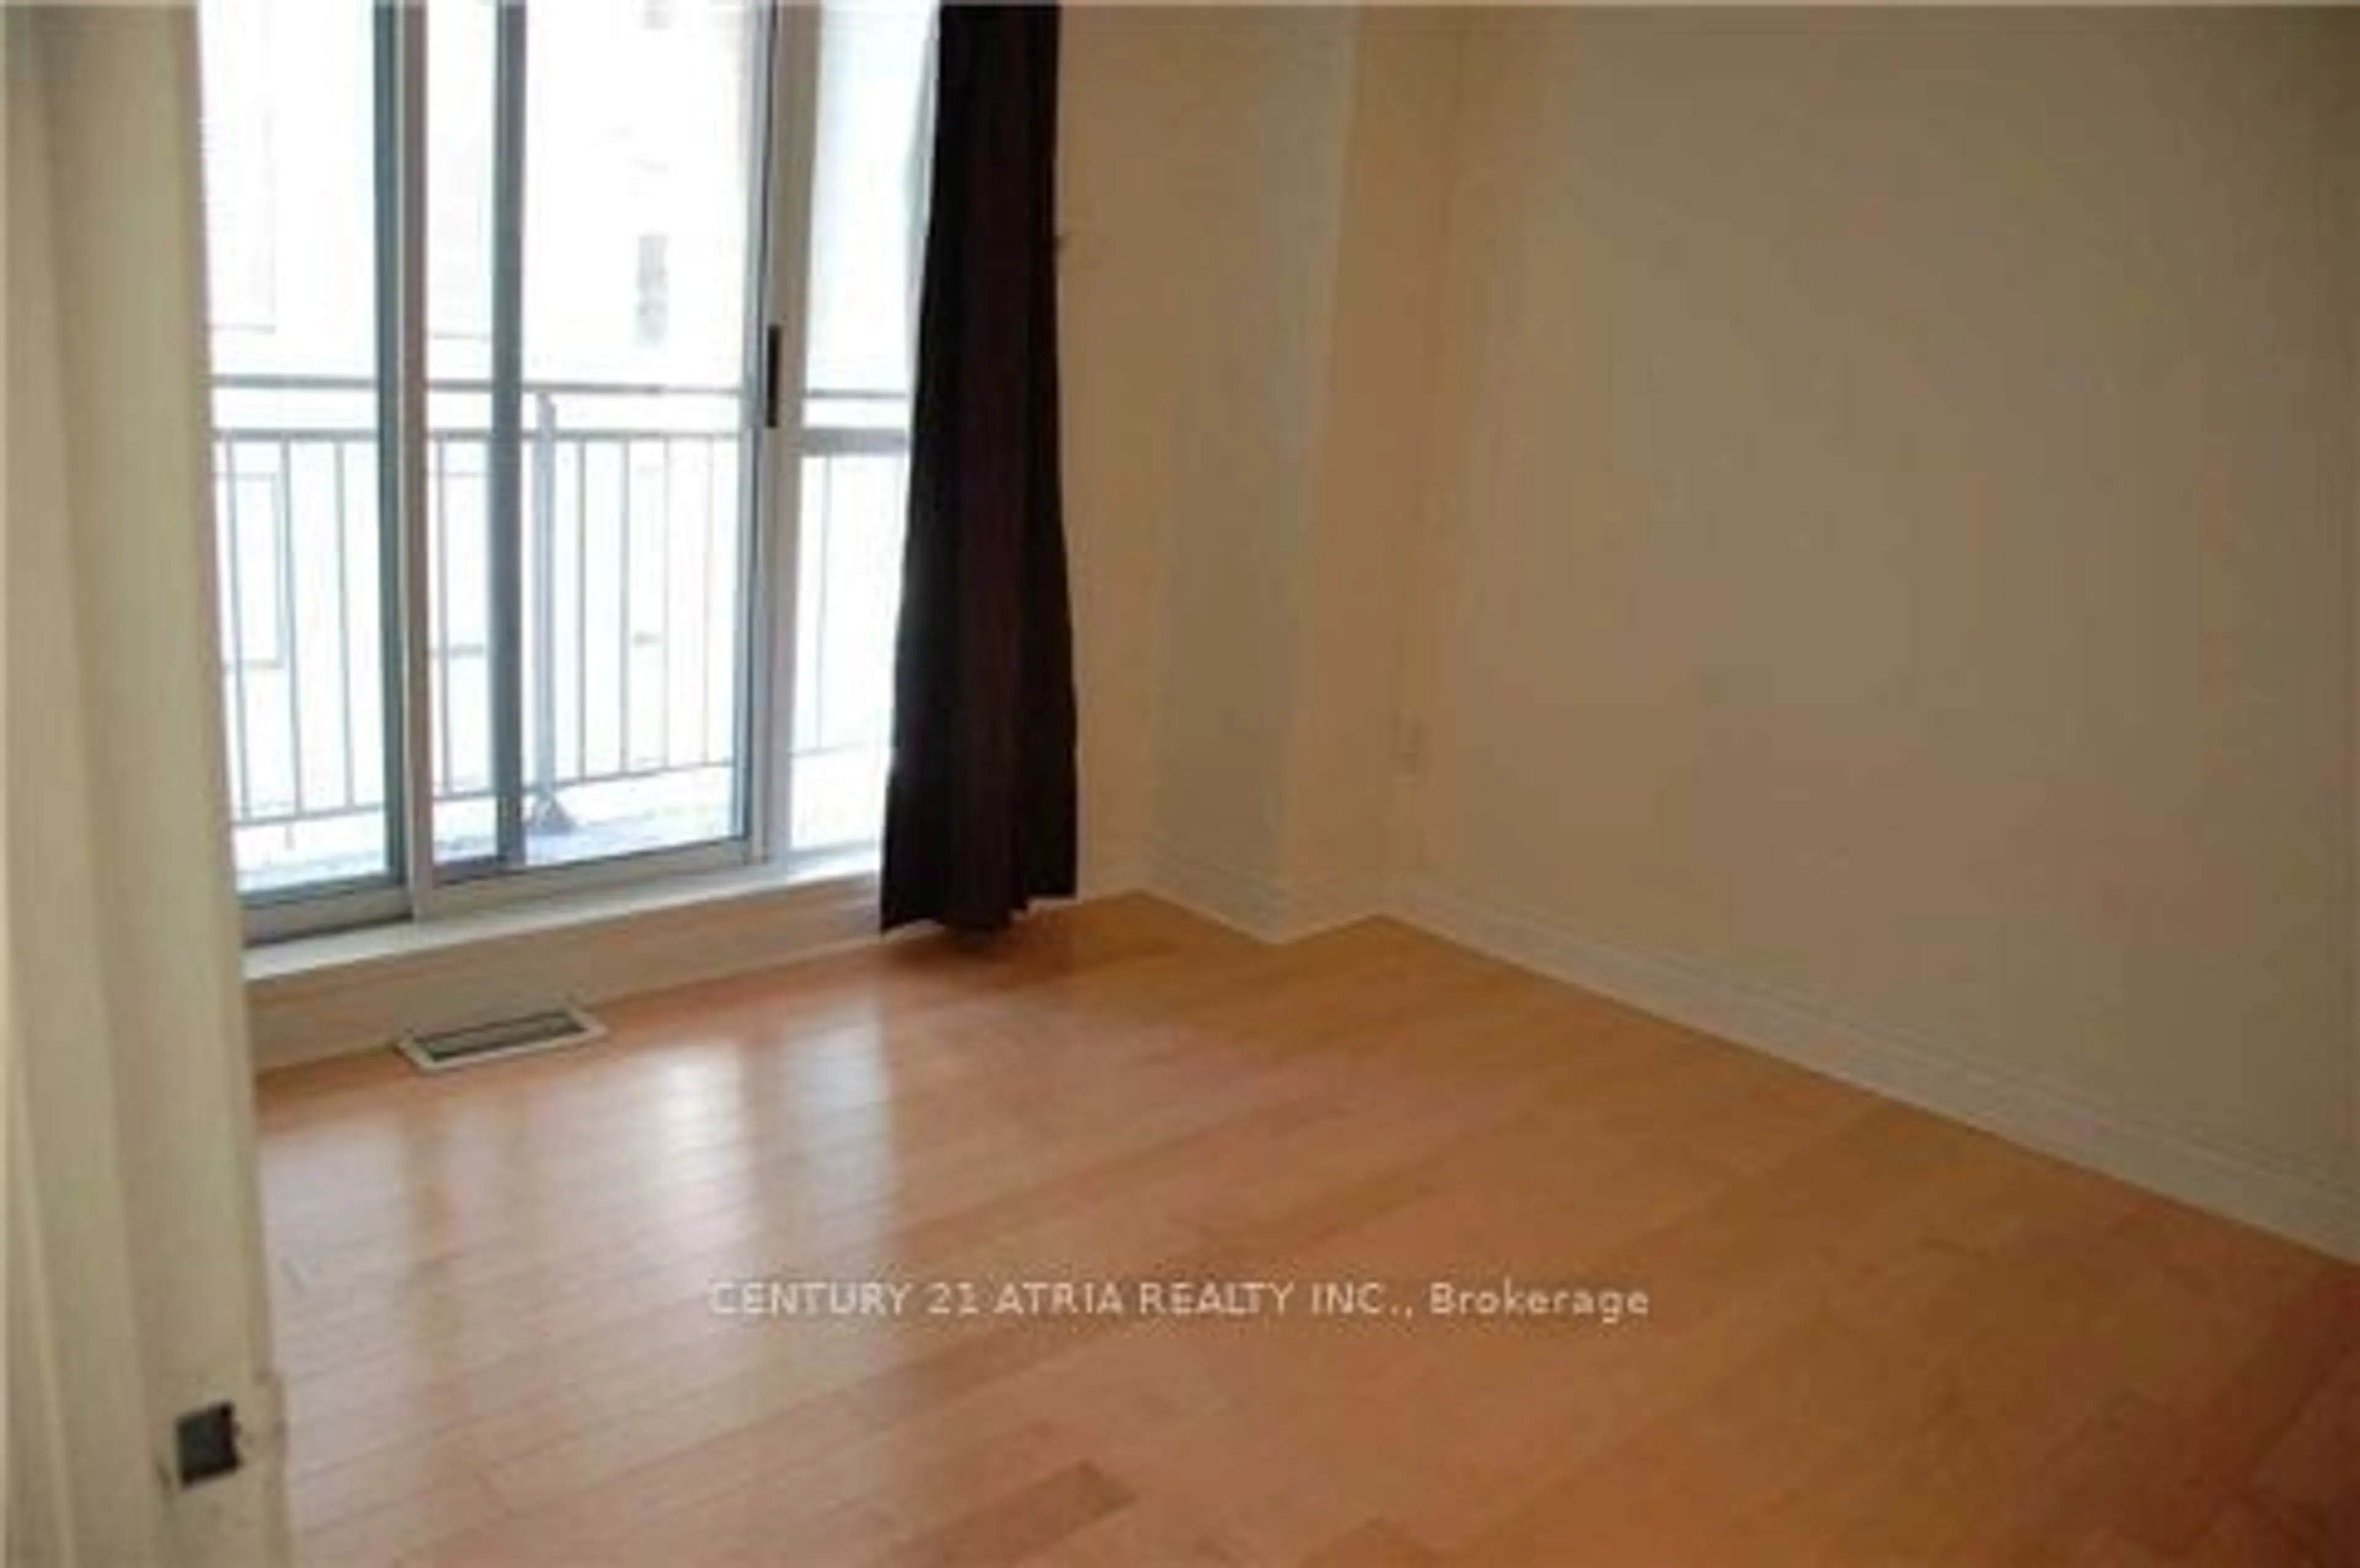 A pic of a room for 80 Cumberland St #501, Toronto Ontario M5R 3V1